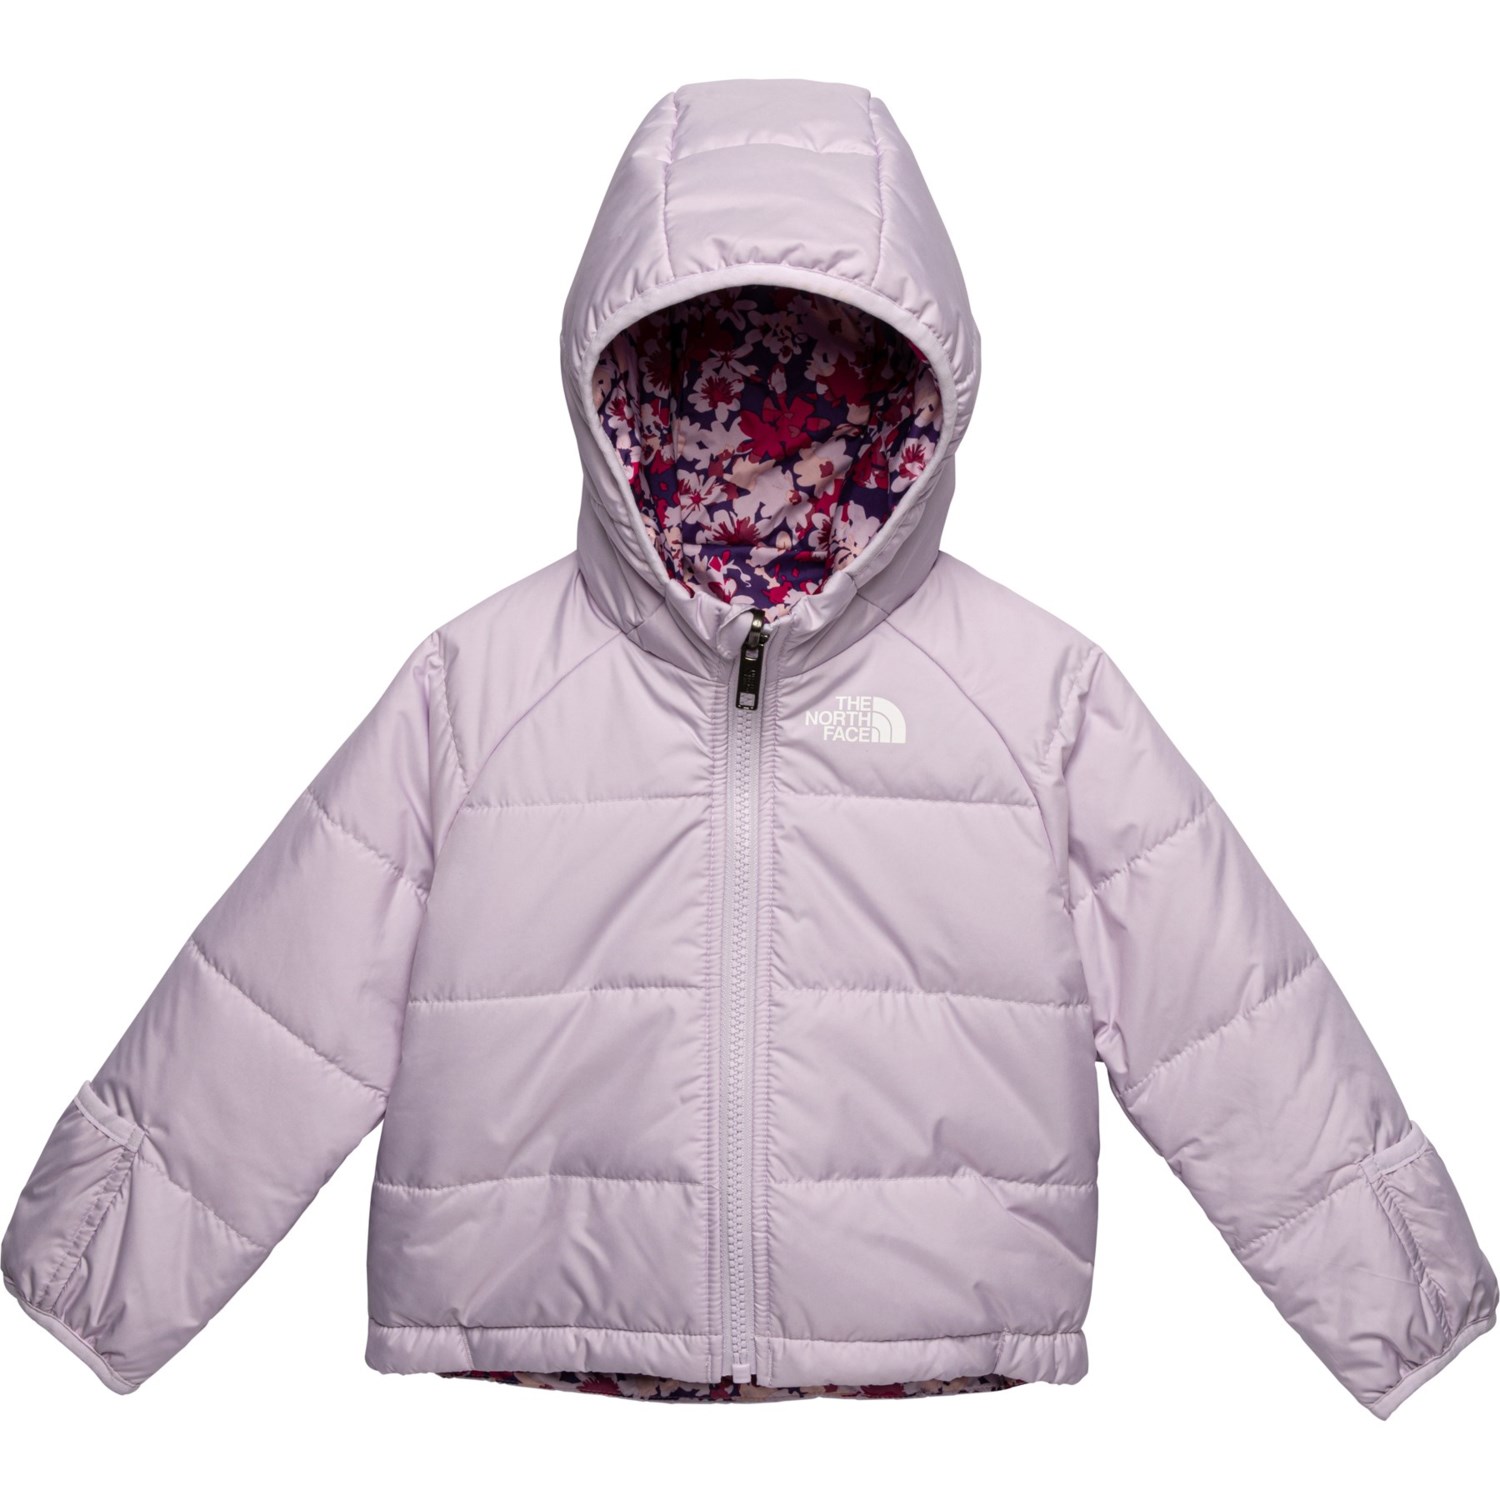 Jacket Hooded Reversible, The Infant Girls Insulated Perrito North - Face